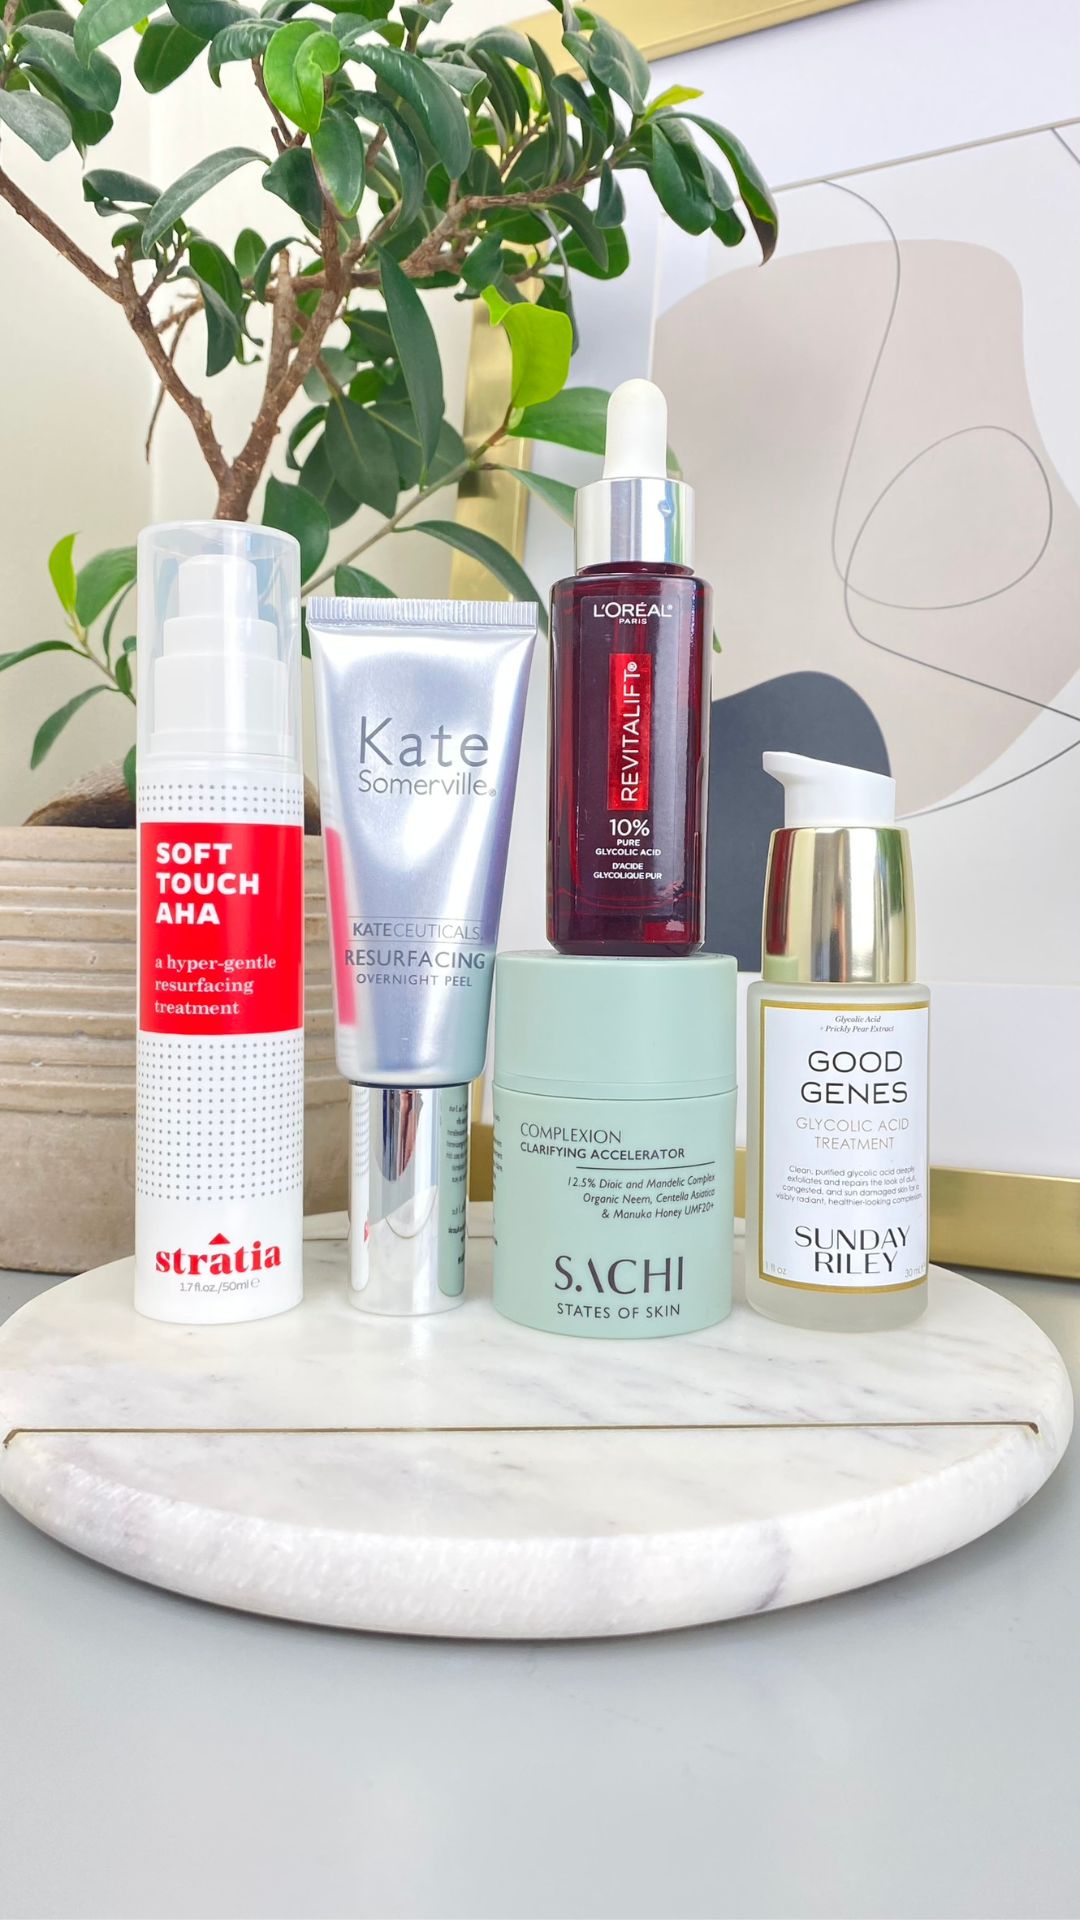 5 Exfoliating Serums for all Budgets 💸